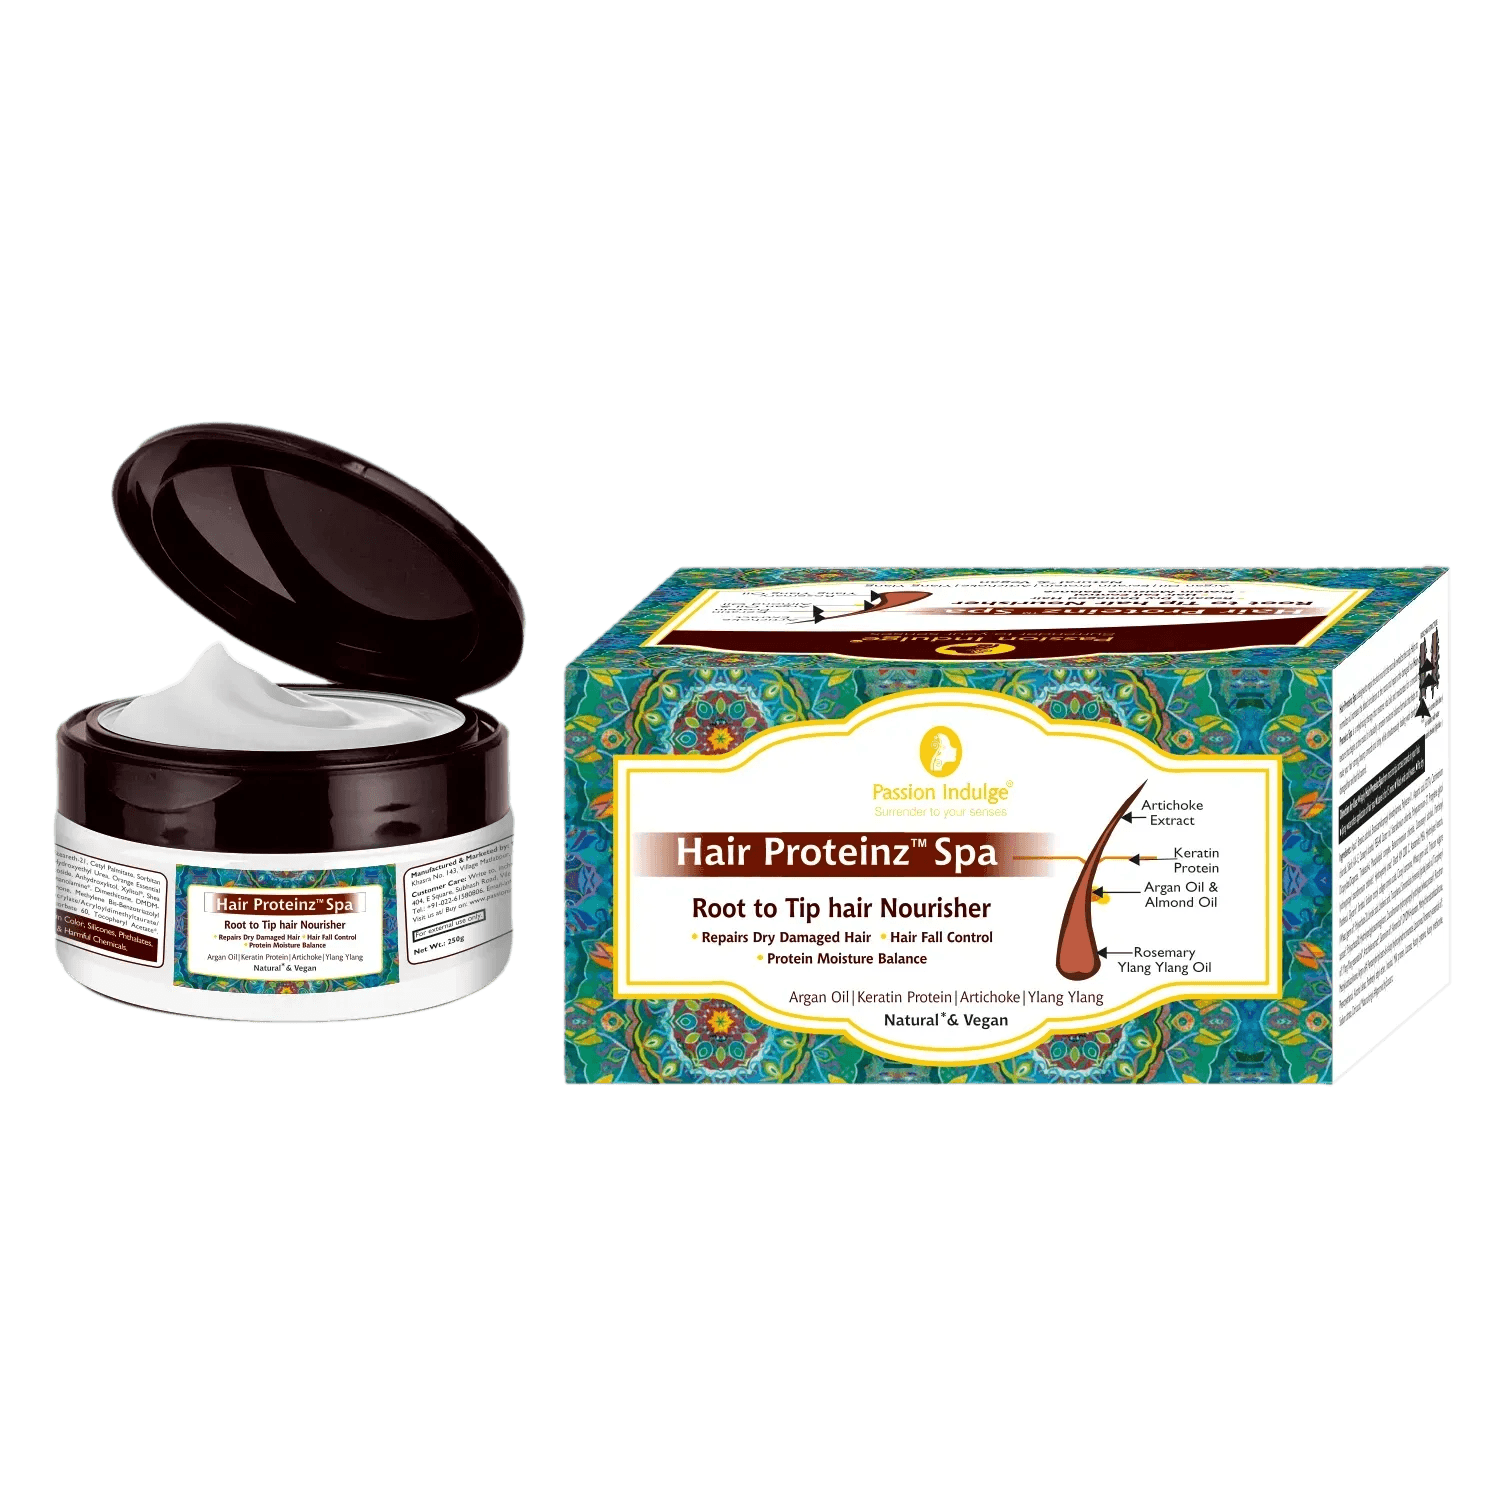 Passion Indulge | Passion Indulge Hair Proteinz Spa (250g)